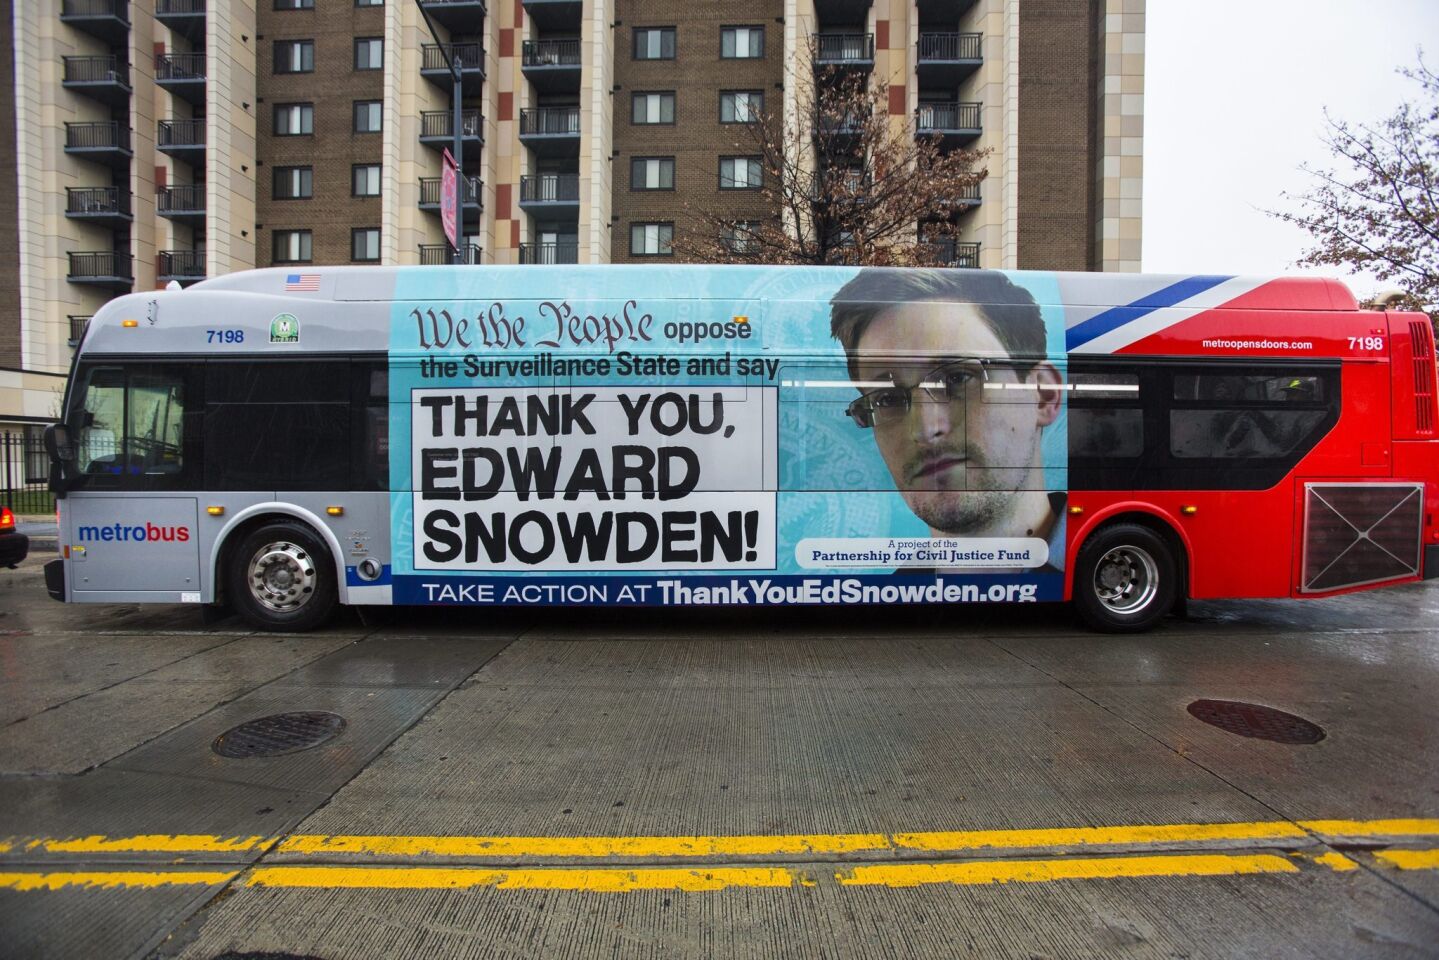 An advertisement thanking leaker Edward Snowden appears on the side of a Metrobus in downtown Washington, D.C.